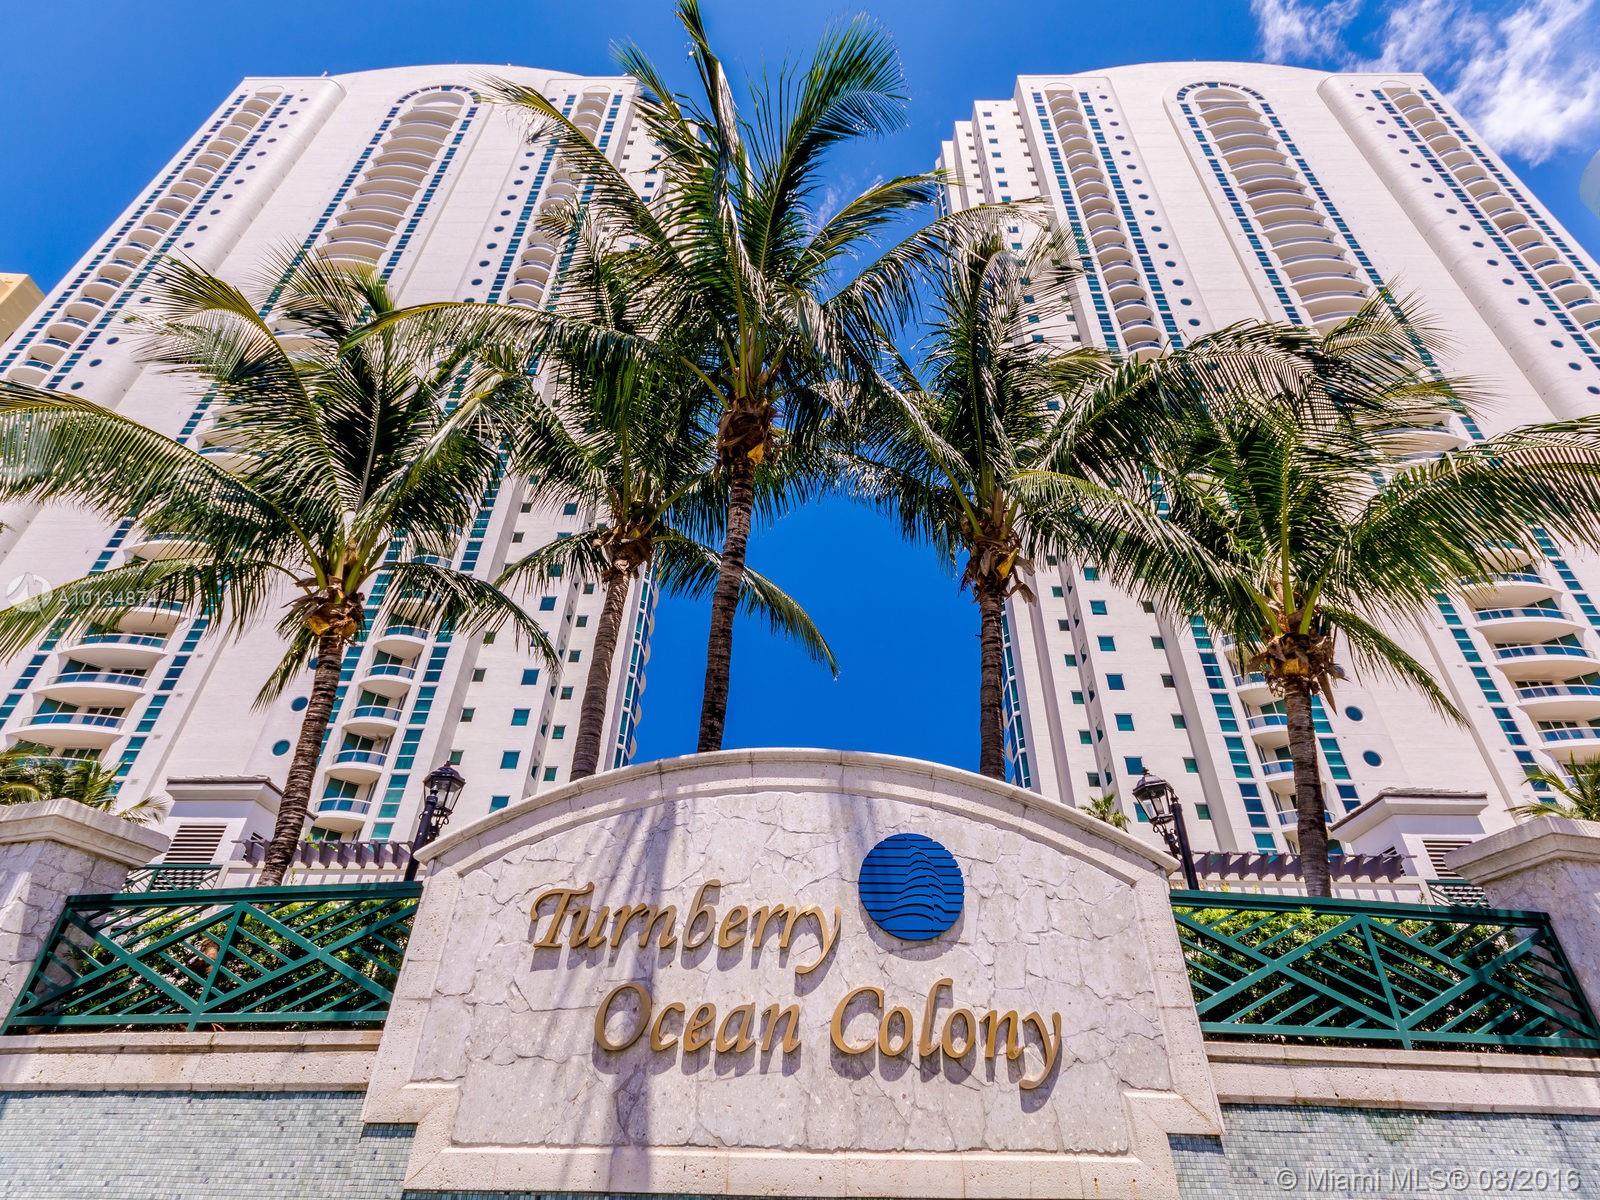 Turnberry Ocean Colony image #1